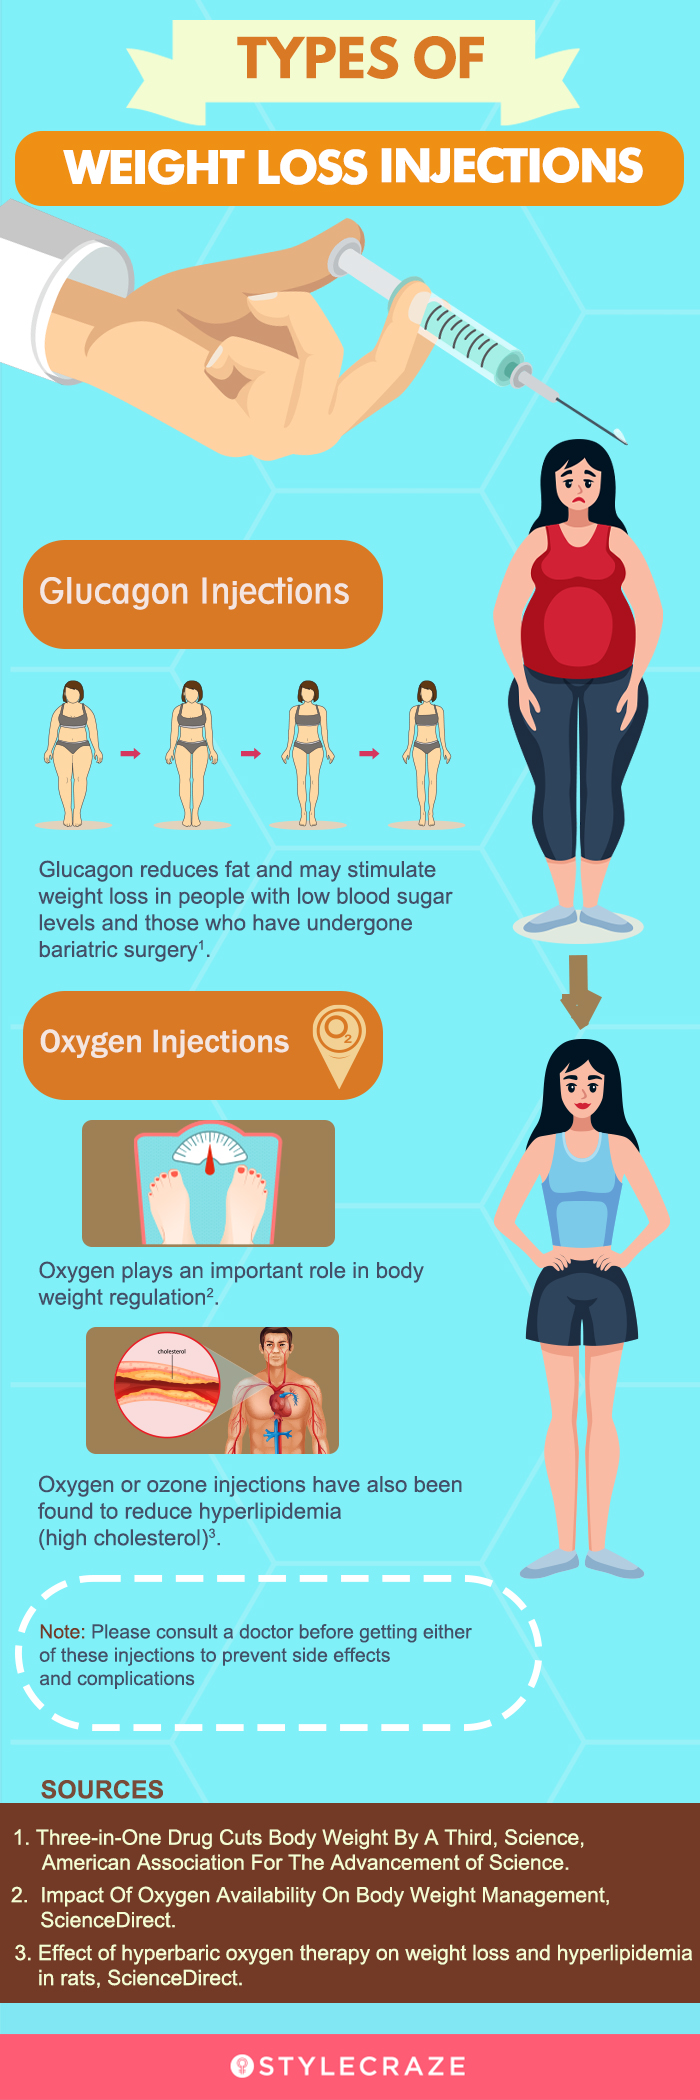 types of weightloss injectioons (infographic)